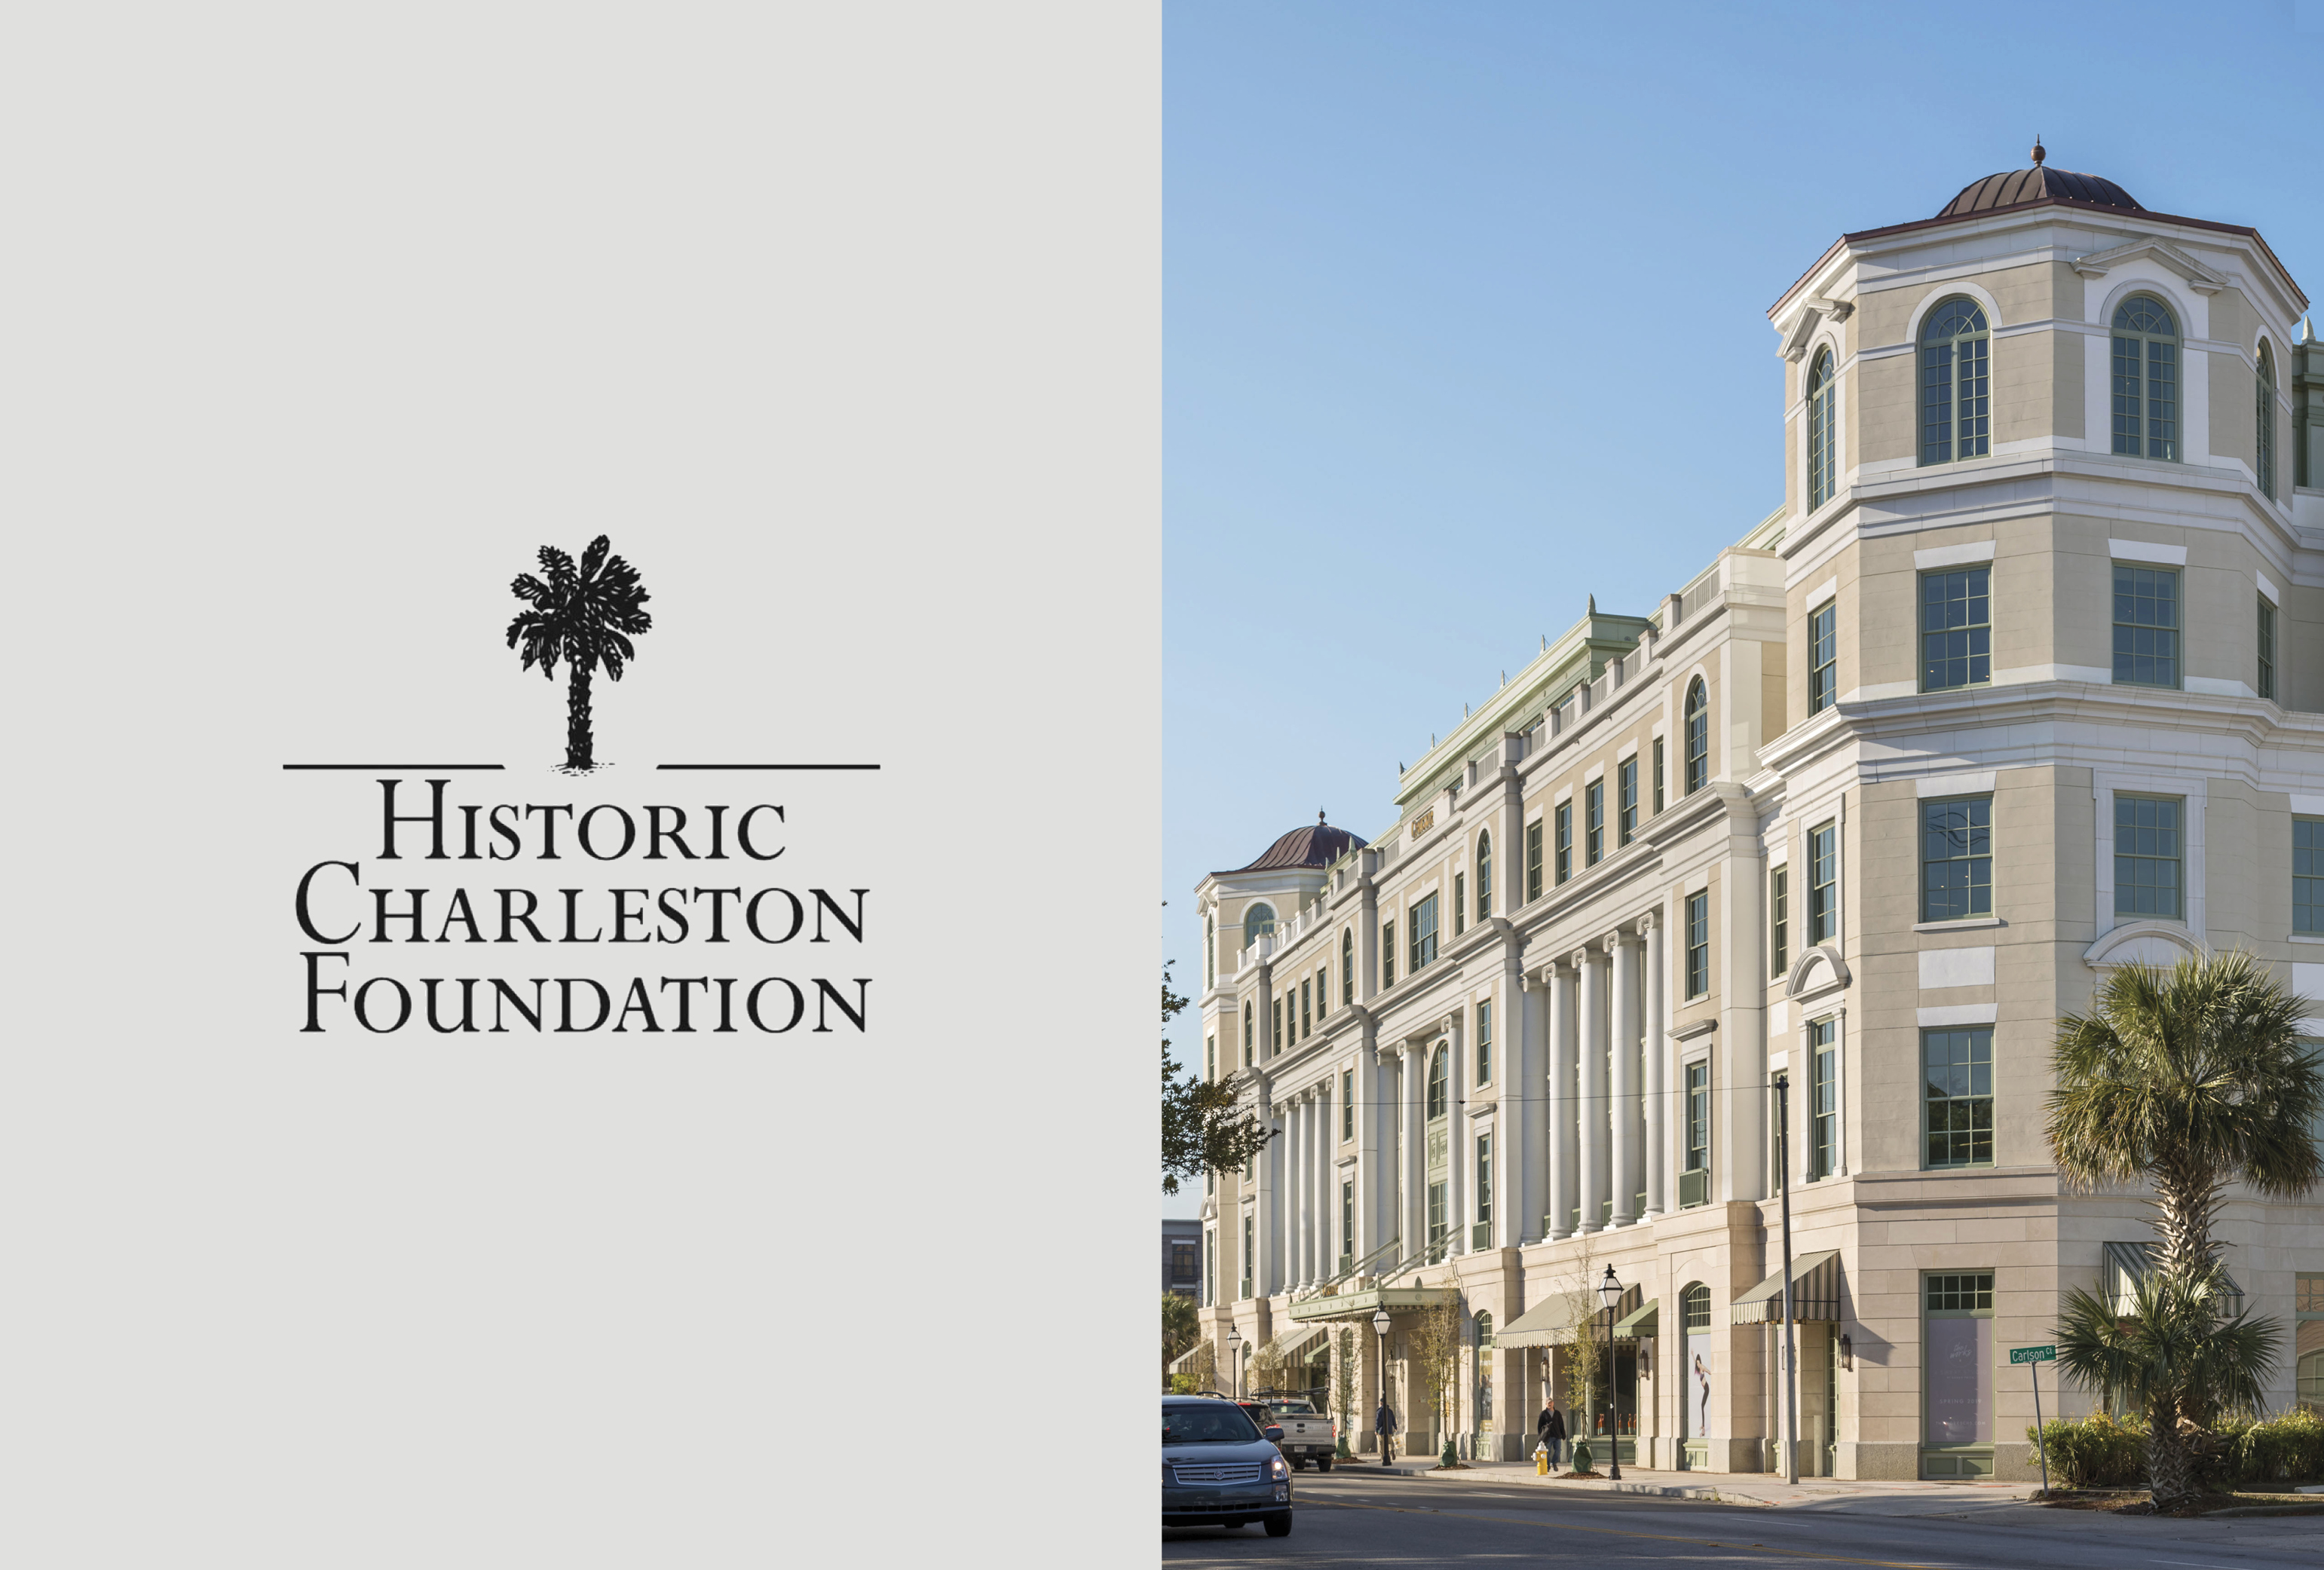 Courier Square Honored With Historic Charleston Foundation Award